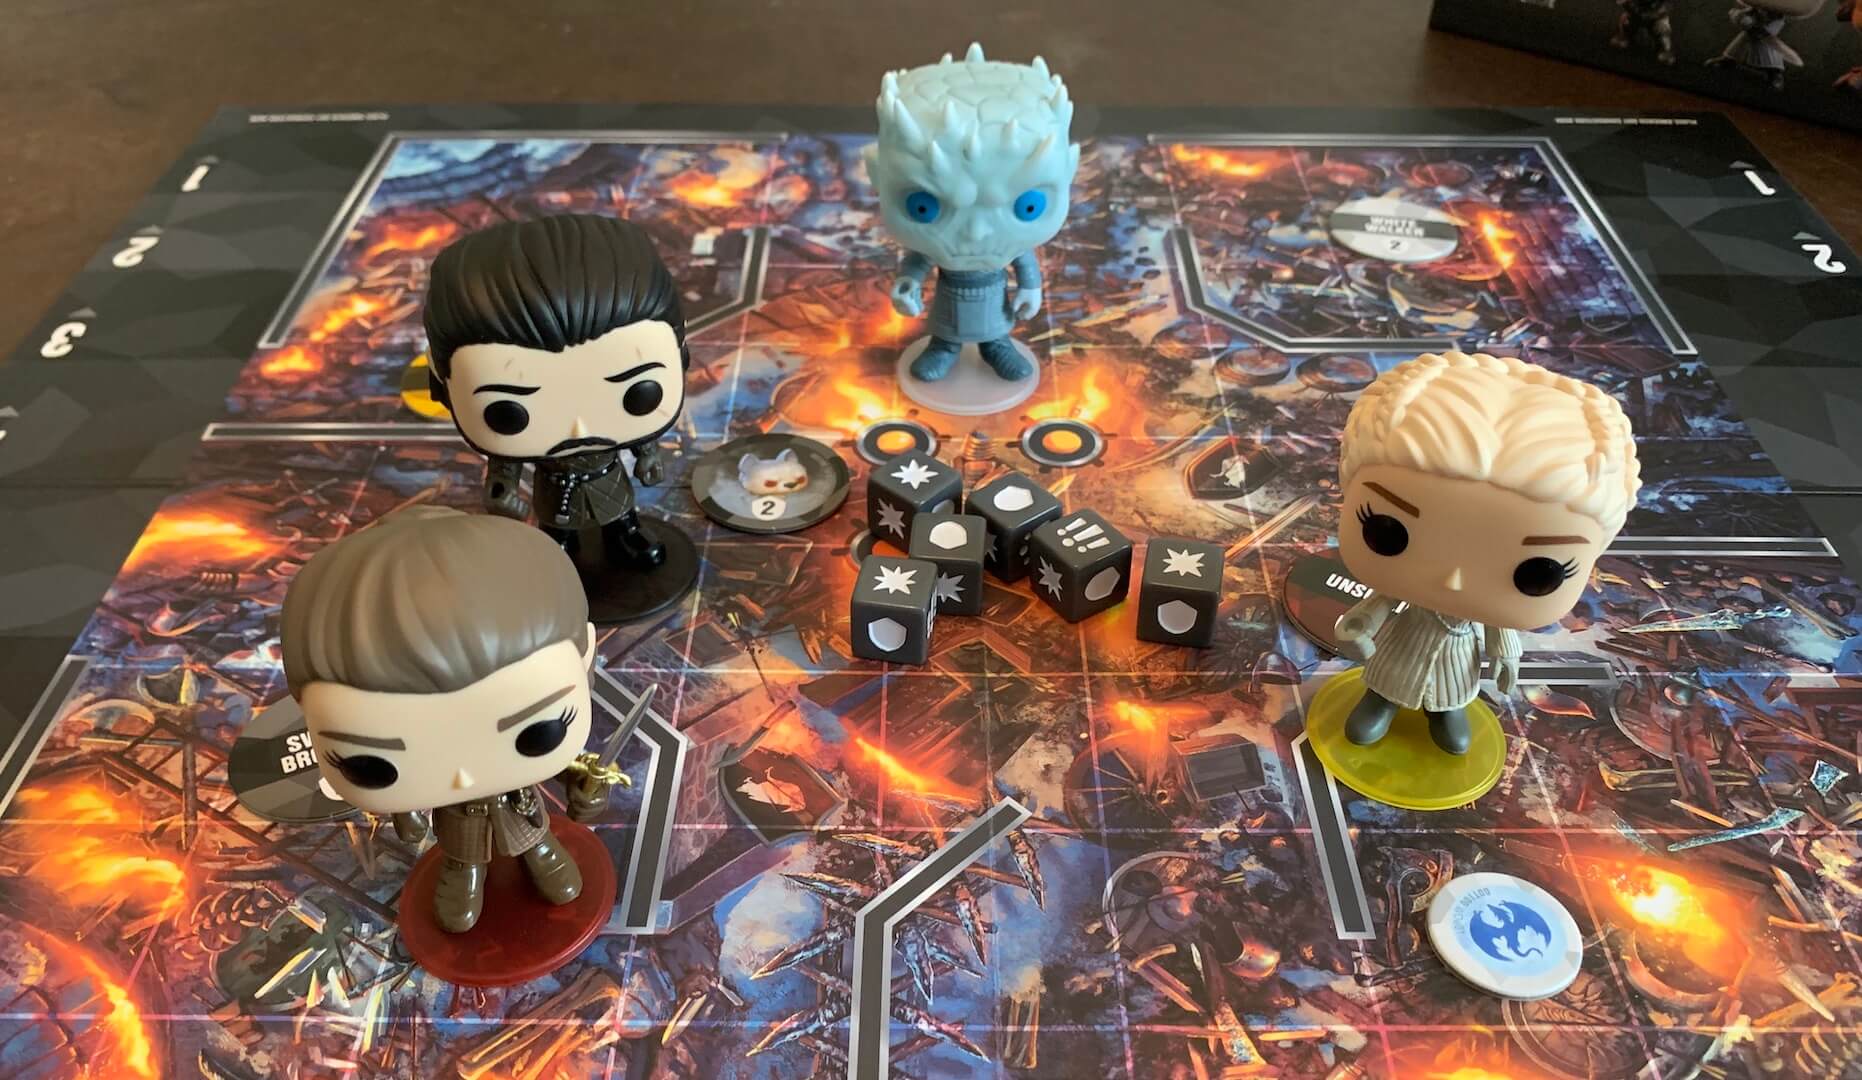 Funkoverse Game of Thrones אותיות אויף דעם ברעט